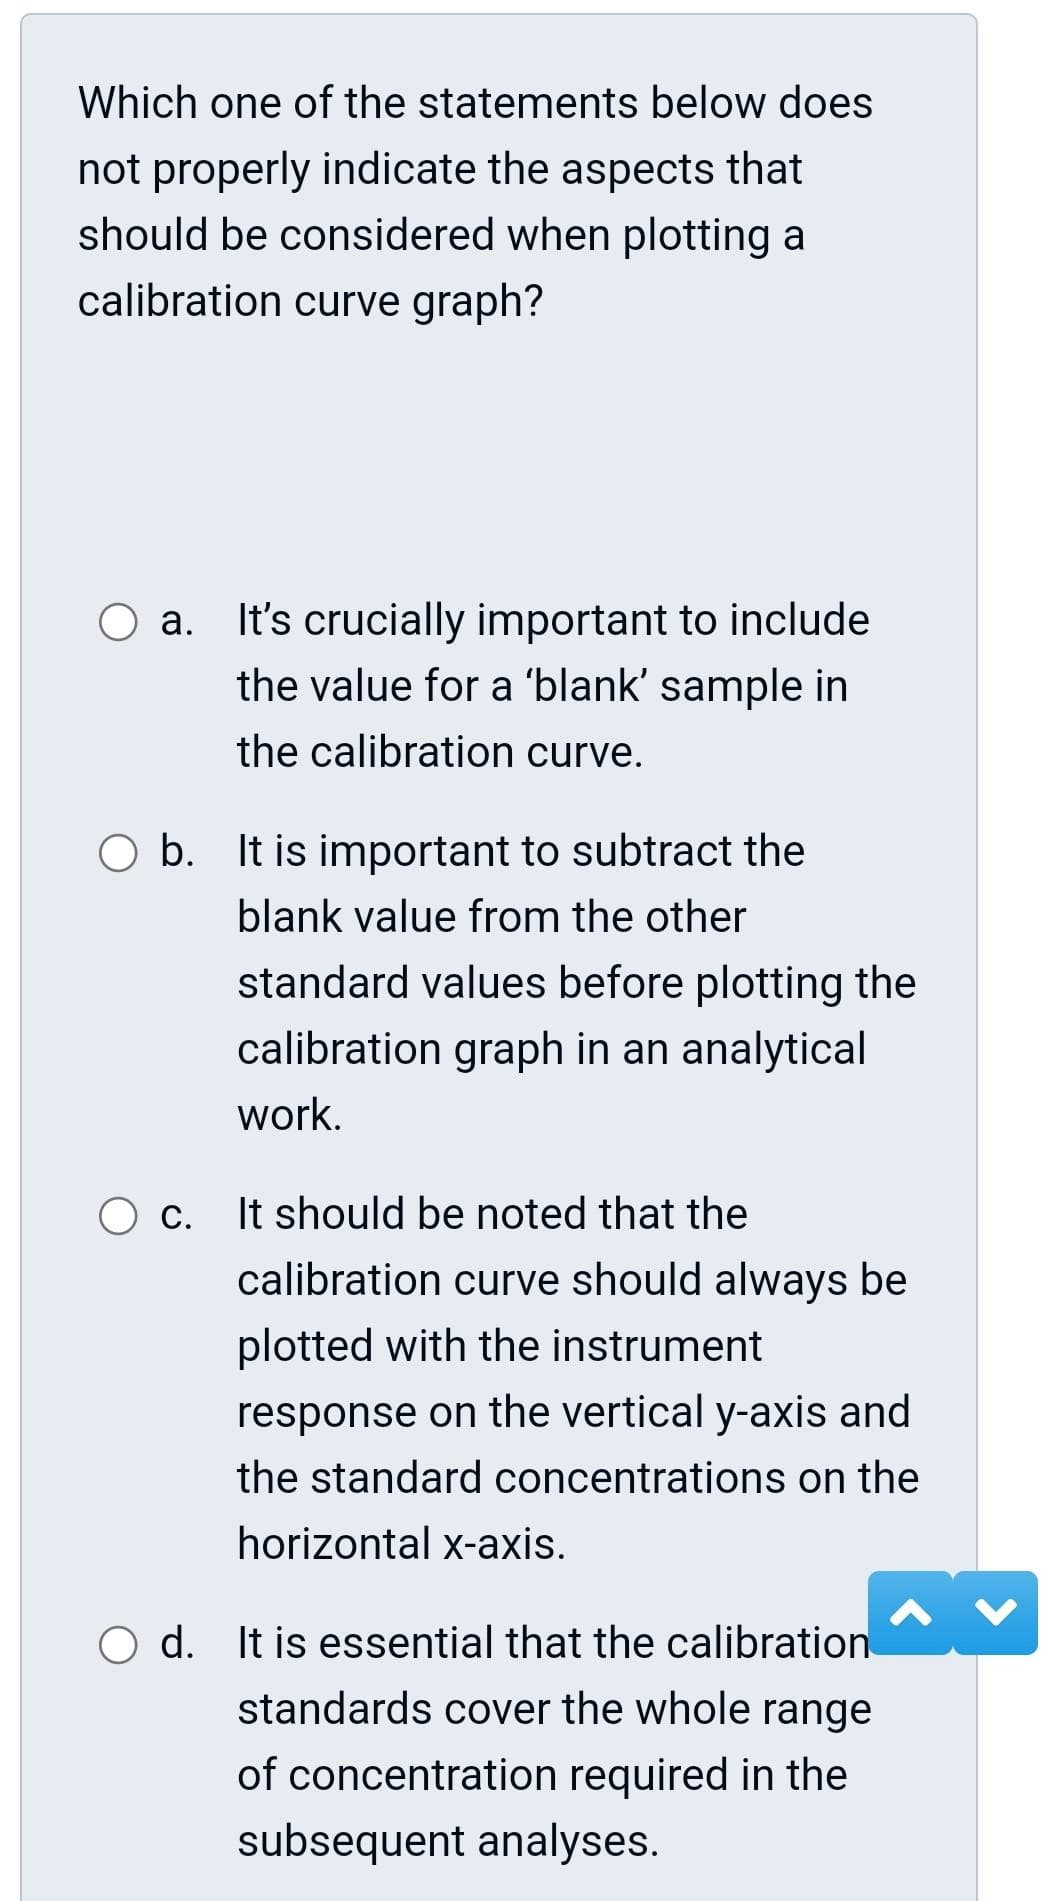 Which one of the statements below does
not properly indicate the aspects that
should be considered when plotting a
calibration curve graph?
a.
It's crucially important to include
the value for a 'blank' sample in
the calibration curve.
O b. It is important to subtract the
blank value from the other
standard values before plotting the
calibration graph in an analytical
work.
O c. It should be noted that the
calibration curve should always be
plotted with the instrument
response on the vertical y-axis and
the standard concentrations on the
horizontal x-axis.
d. It is essential that the calibration
standards cover the whole range
of concentration required in the
subsequent analyses.